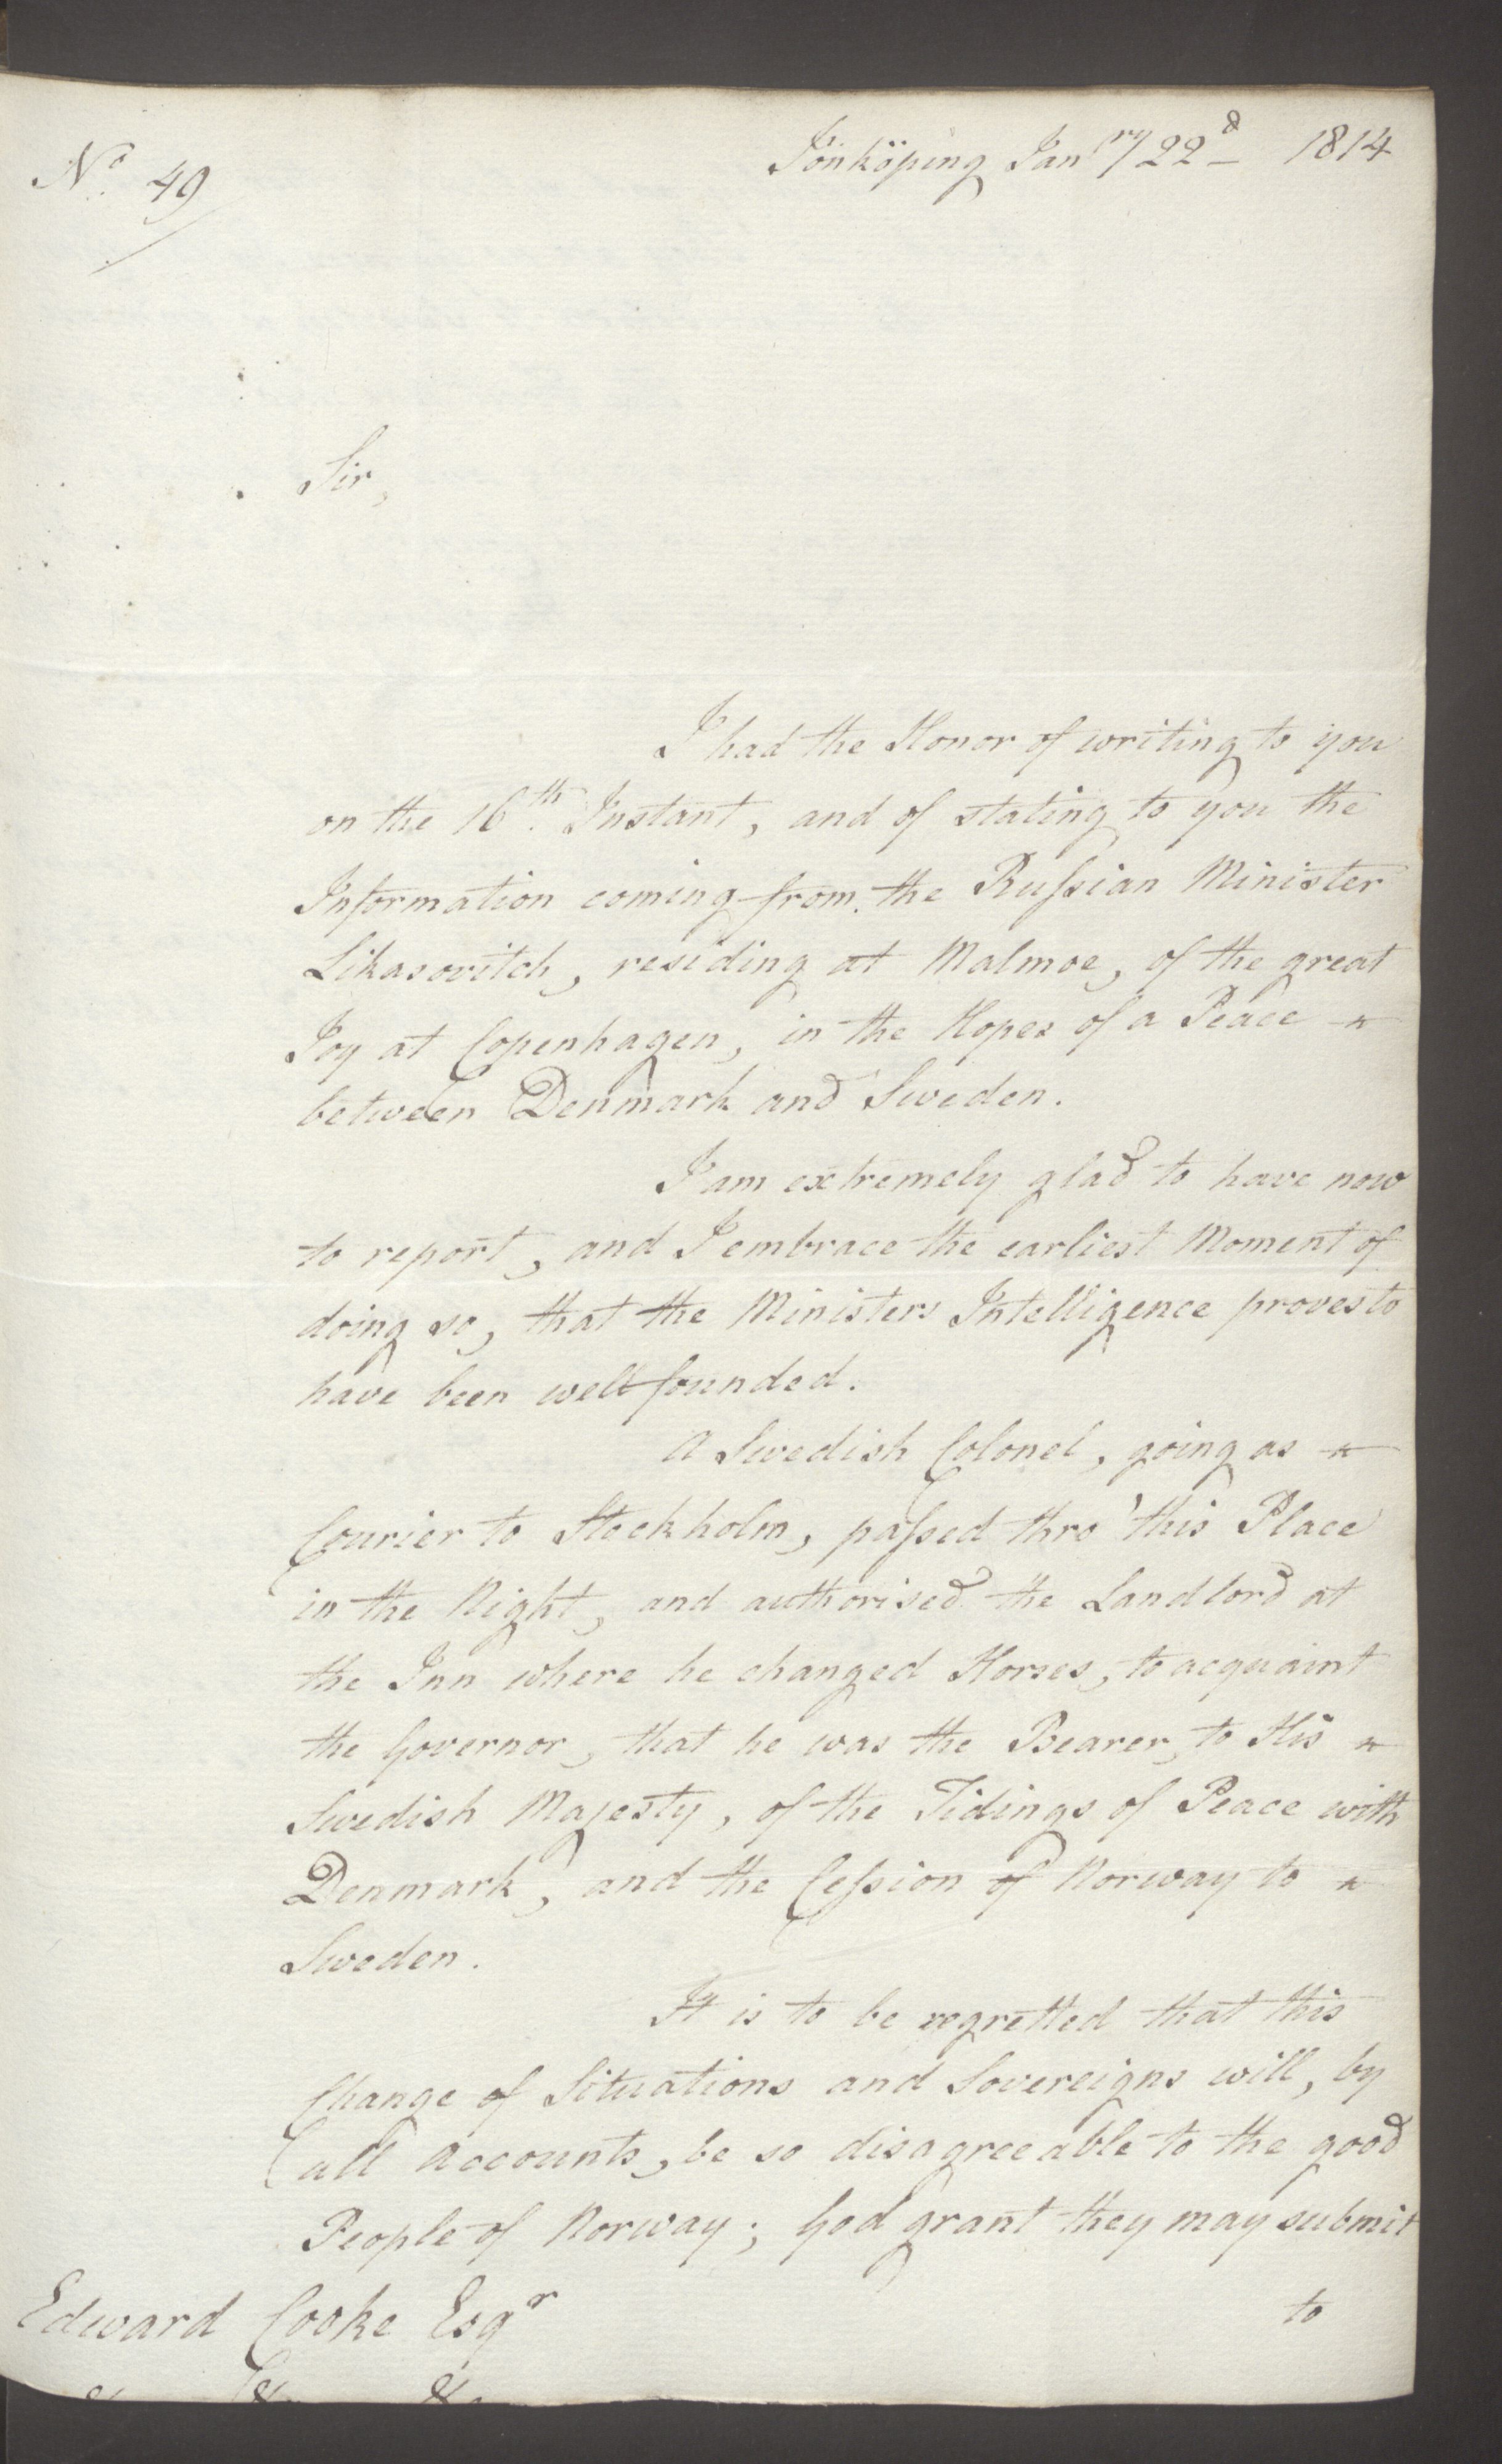 Foreign Office*, UKA/-/FO 38/16: Sir C. Gordon. Reports from Malmö, Jonkoping, and Helsingborg, 1814, p. 11